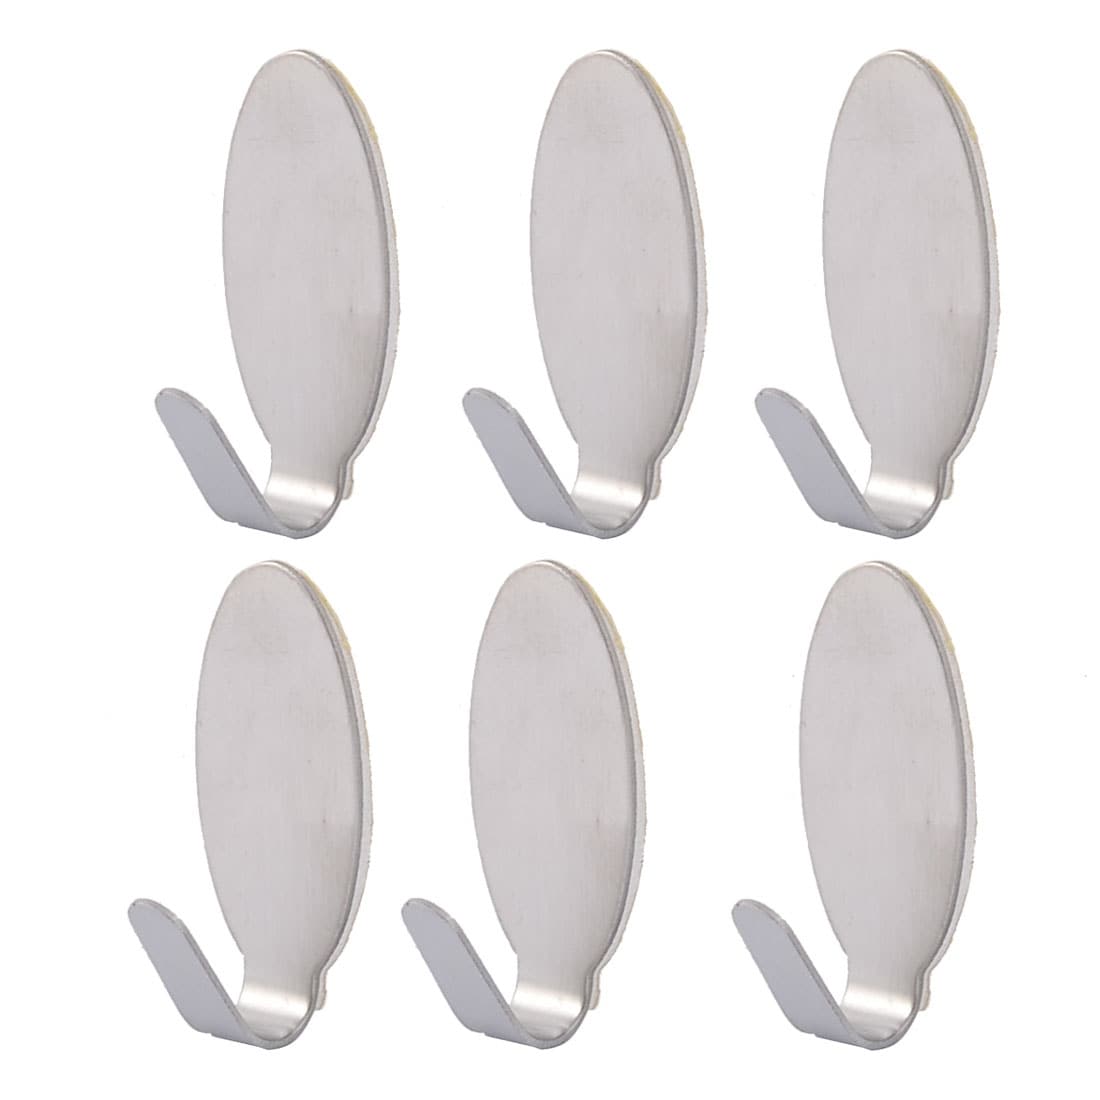 Stainless Steel Oval Shaped Self Adhesive Wall Hooks Hanger 6pcs - Silver -  1.4